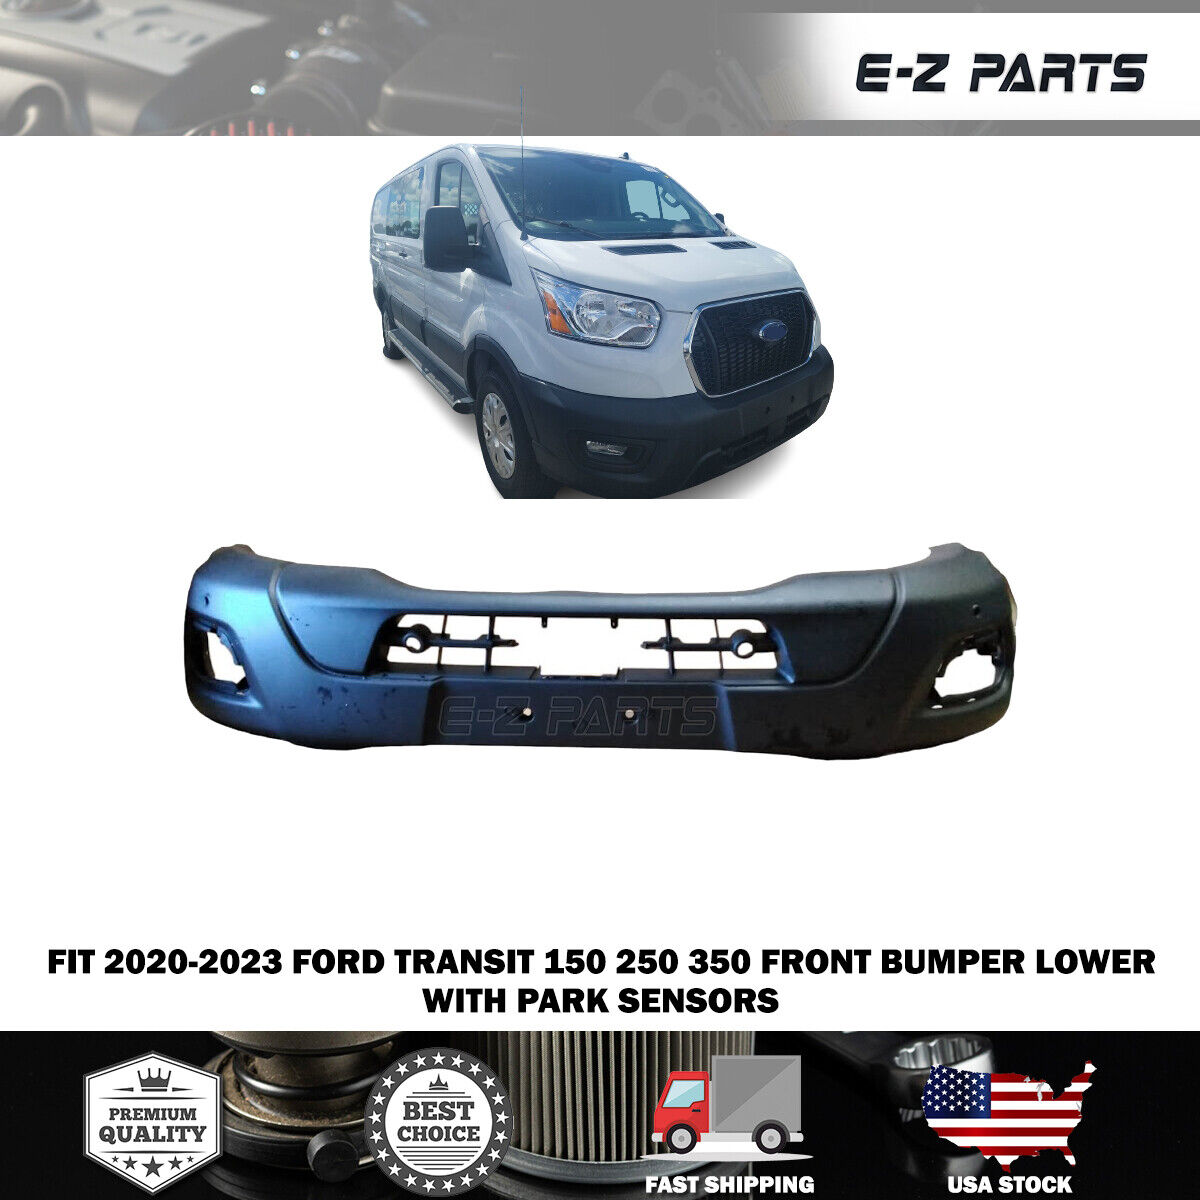 For 2020-2023 Ford Transit 150 250 350 Front Bumper Lower with Park Sensors